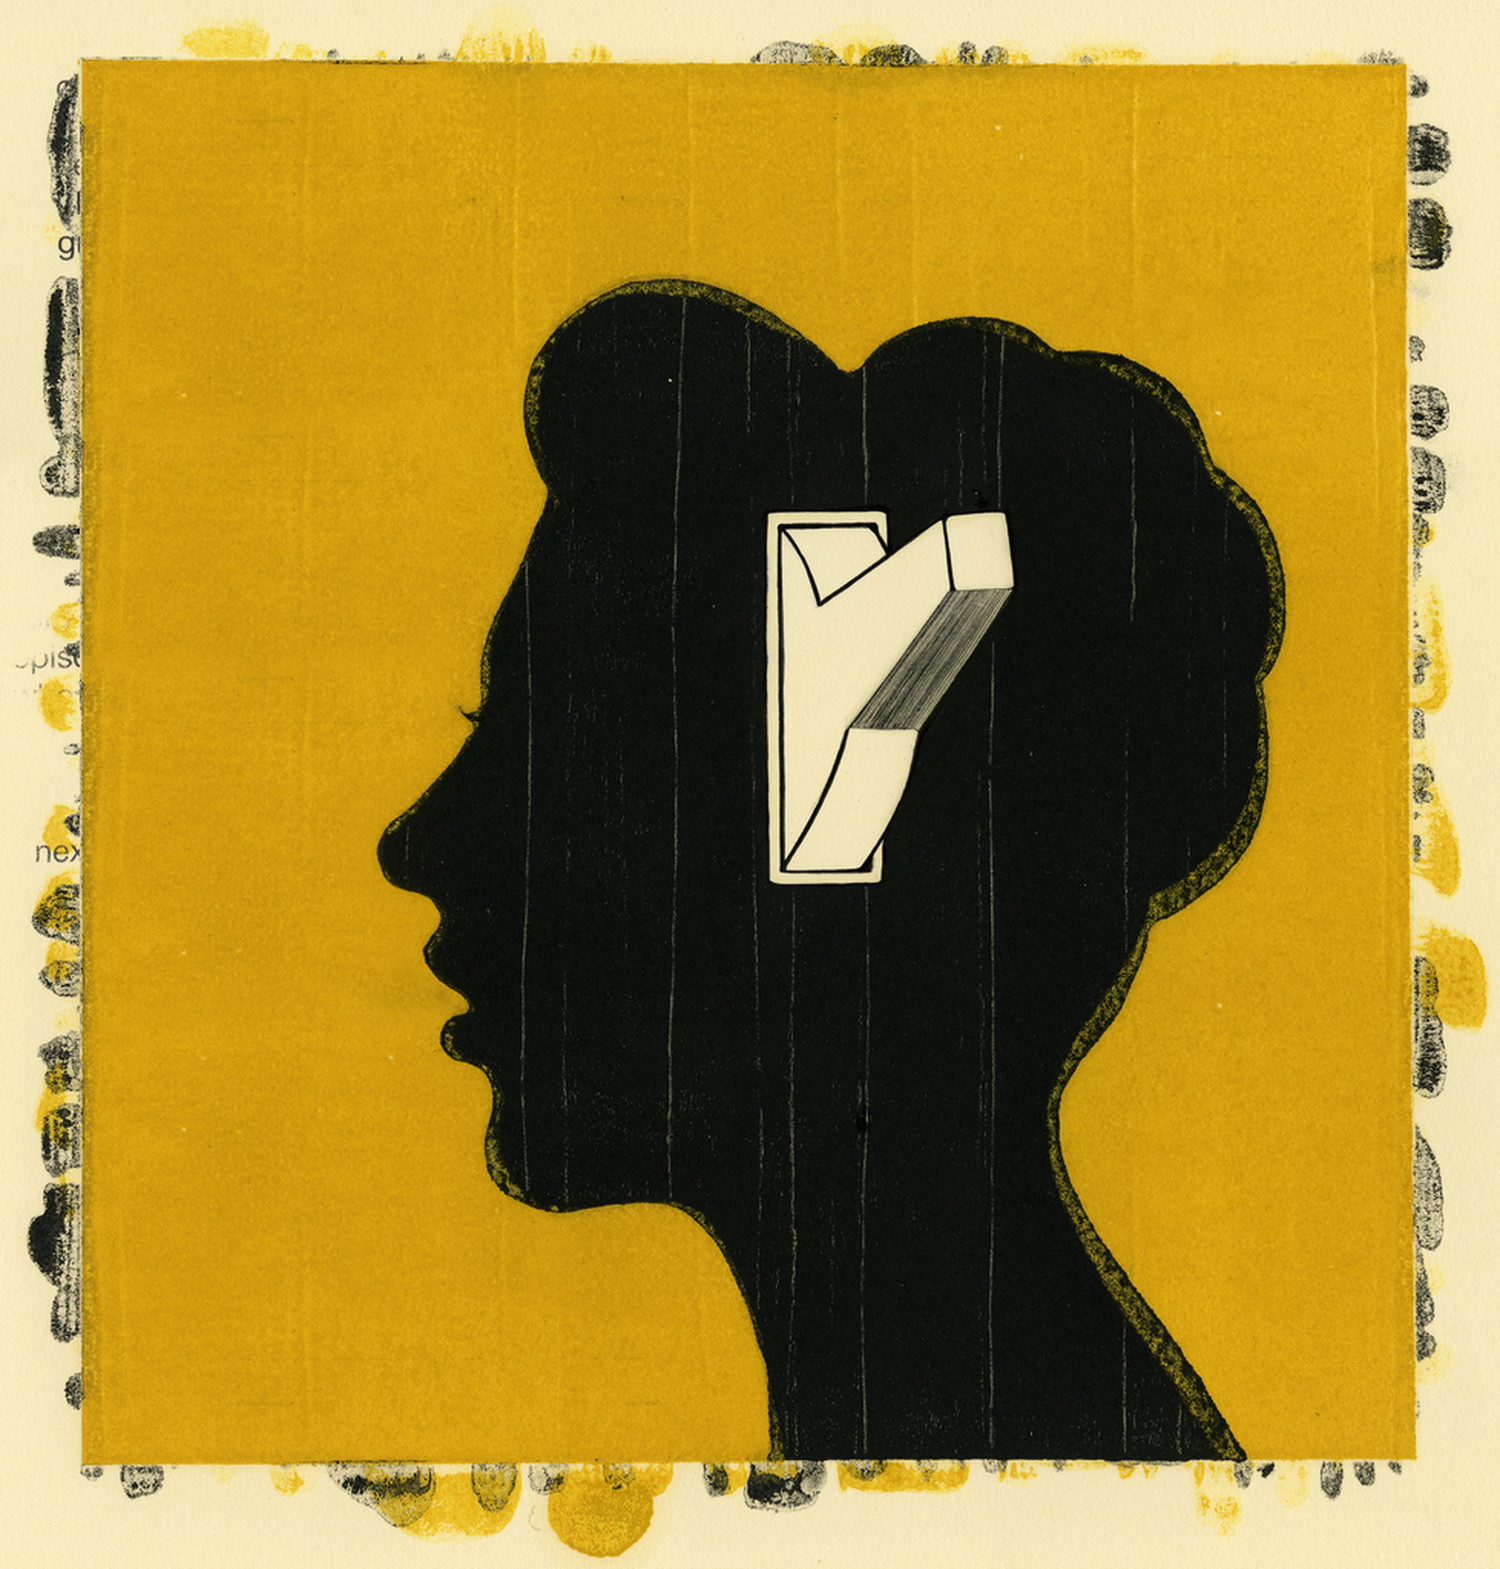 Silhouette of a woman's head with a light switch in the center of it